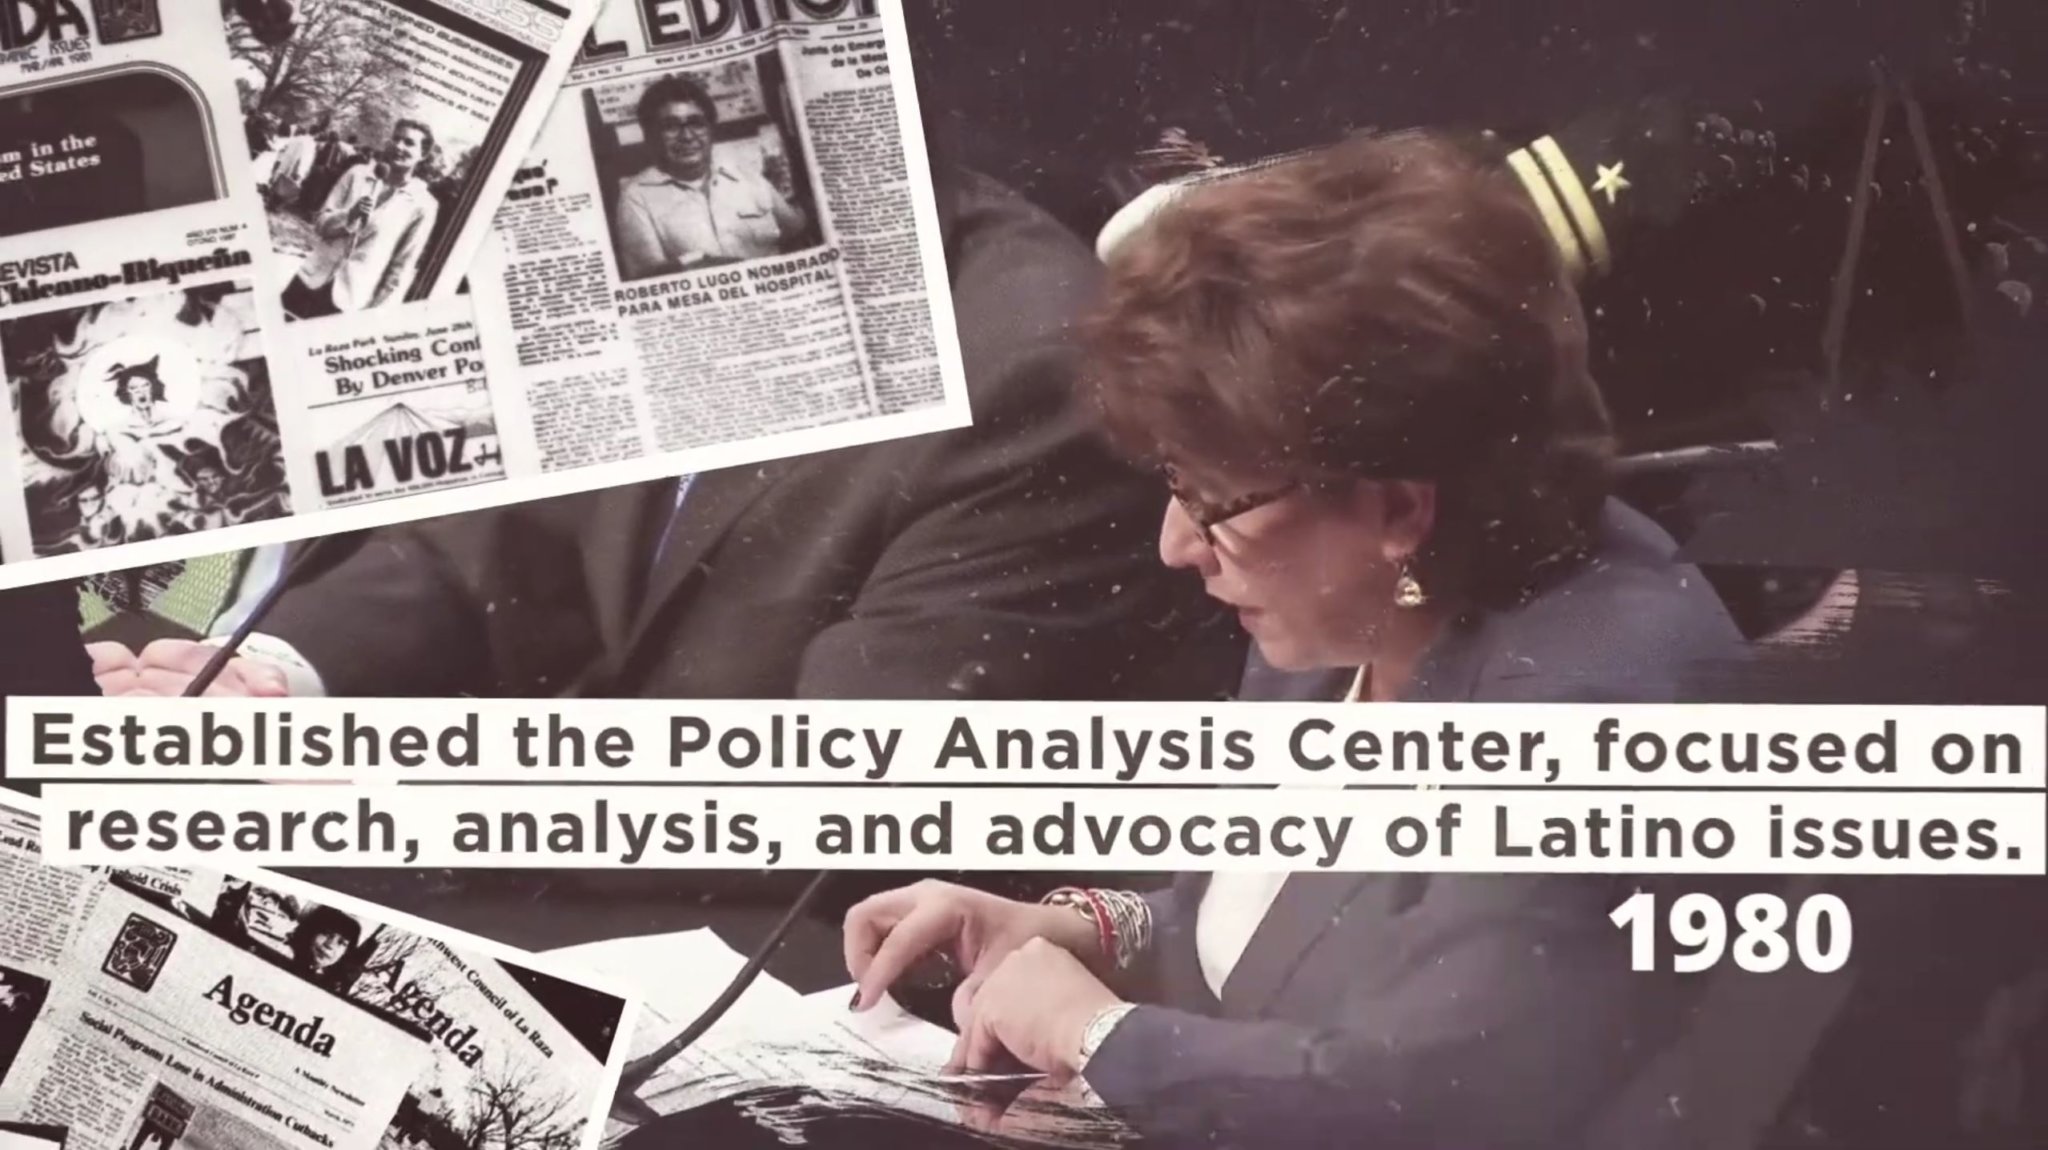 A frame from the UnidosUS video covering the establishment of the Policy Analysis Center in 1980.